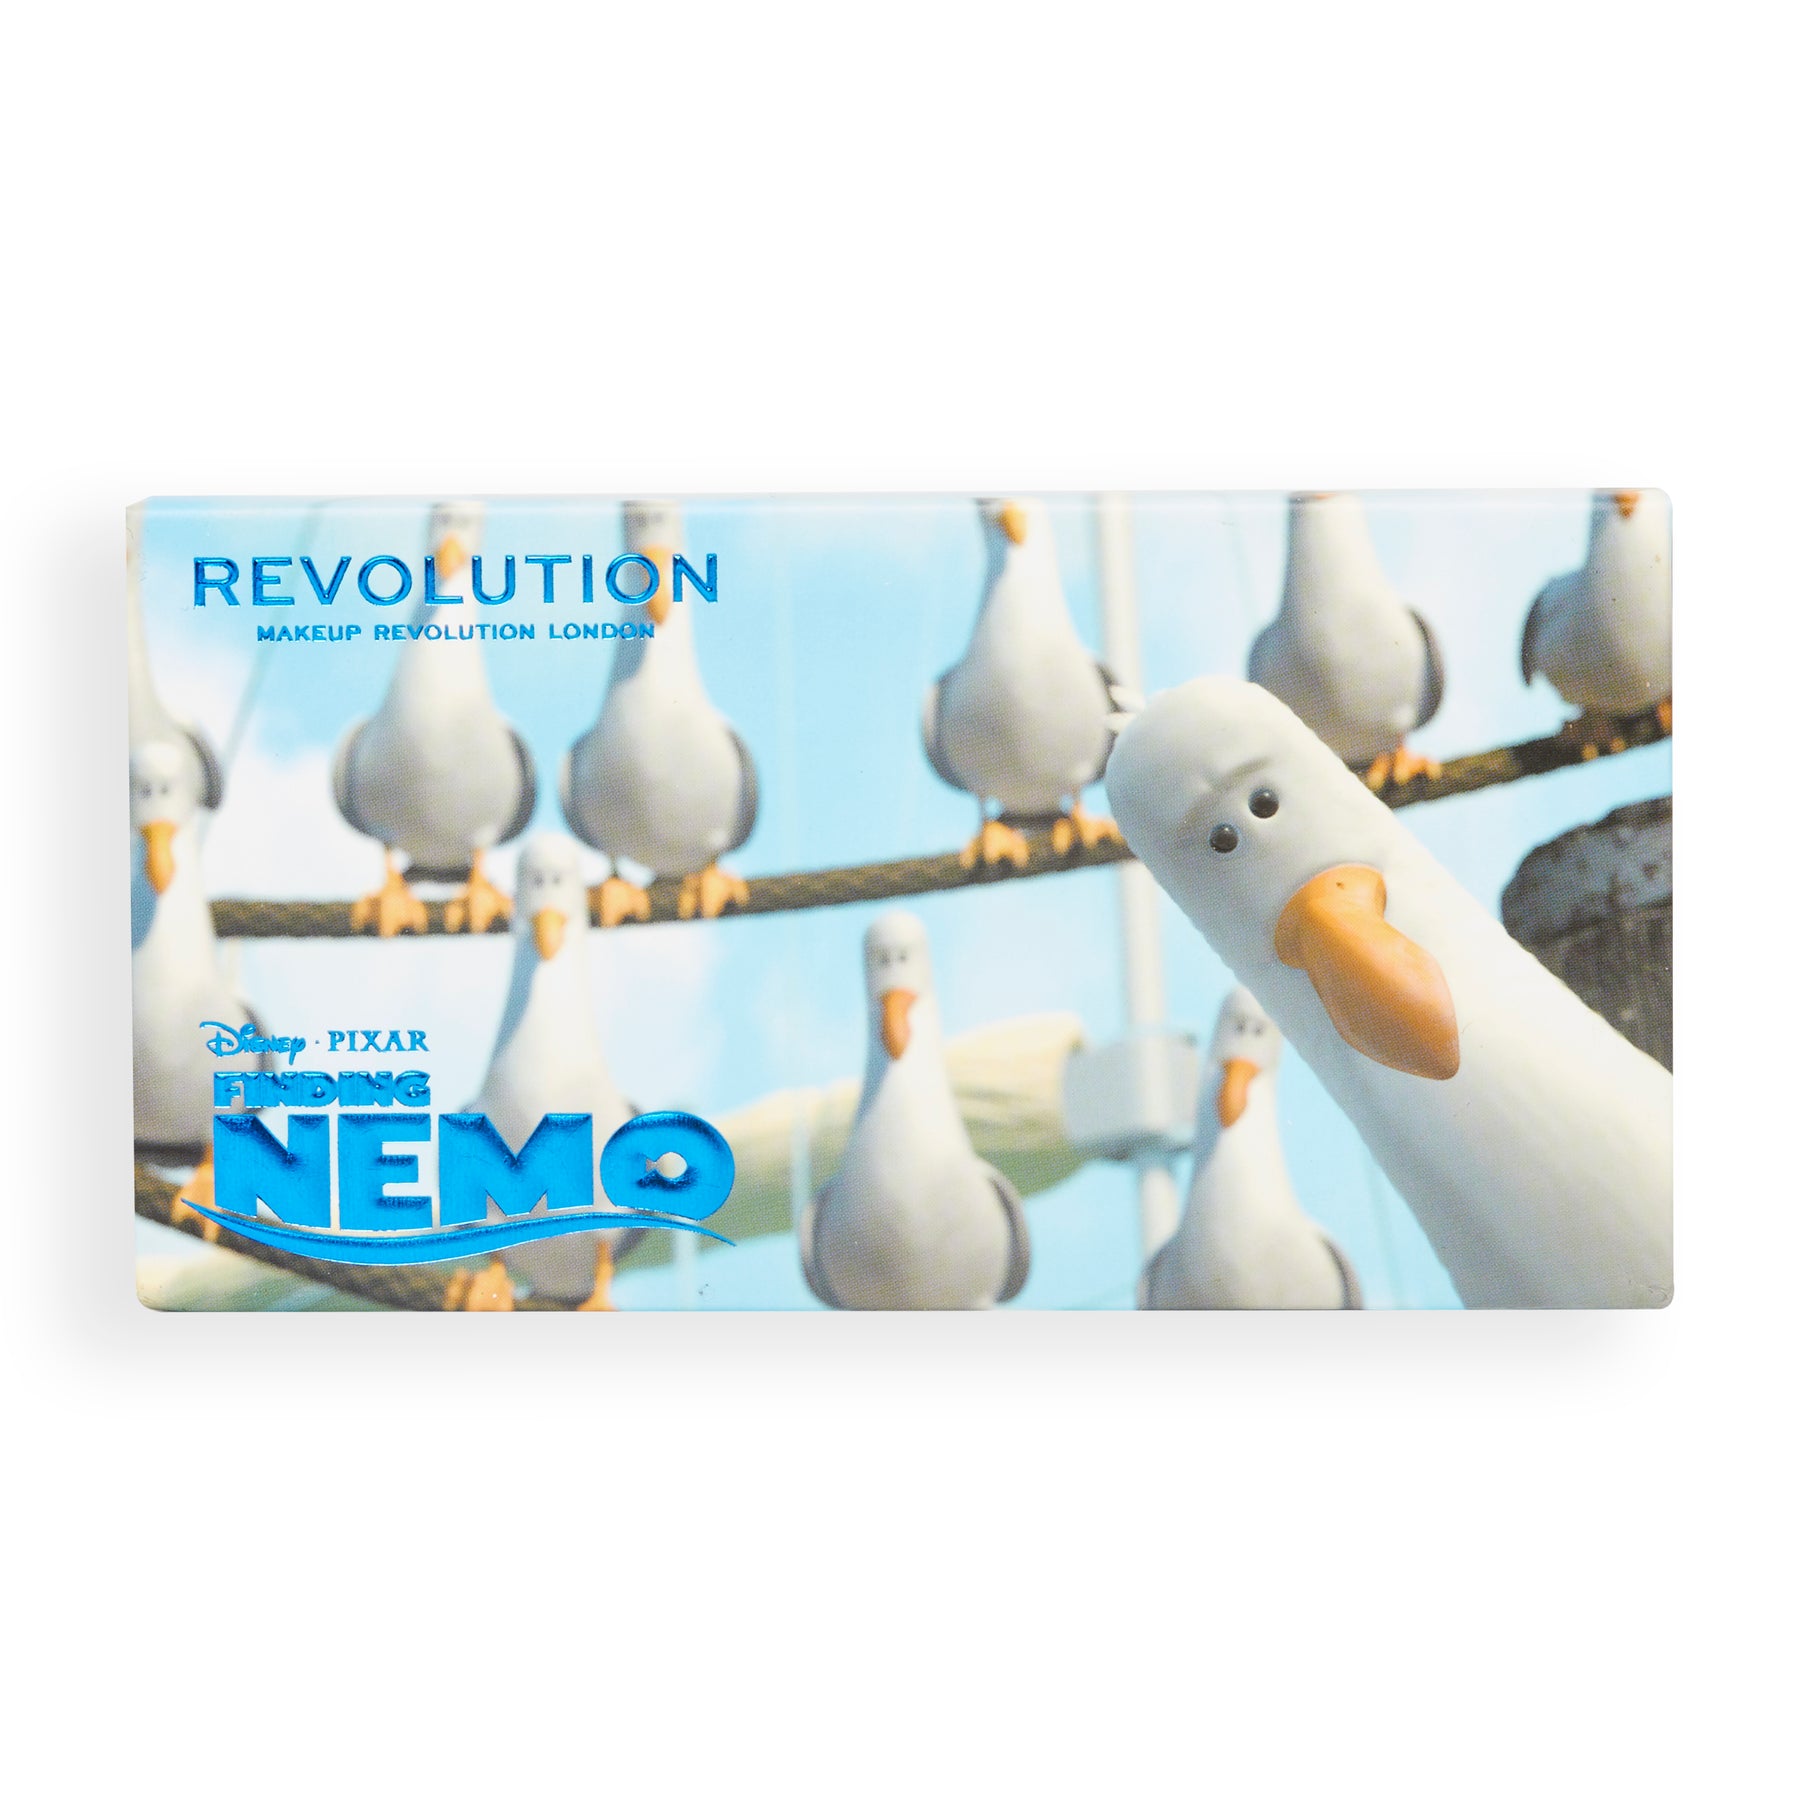 DISNEY & PIXAR’S FINDING NEMO AND REVOLUTION MINE SHADOW PALETTE OUTLET